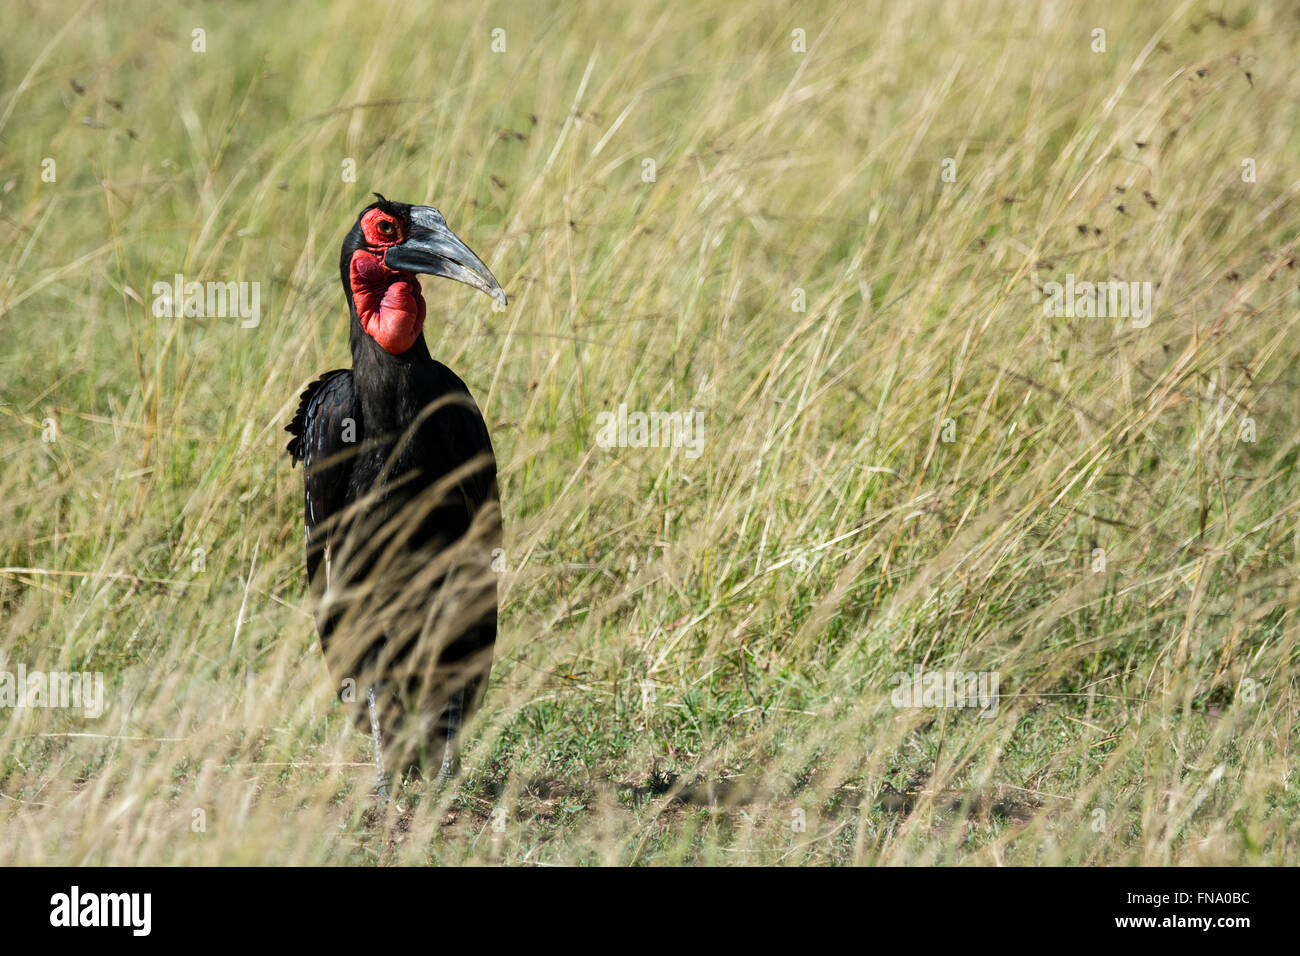 Southern Ground Hornbill, Bucorvus leadbeateri or cafer, standing in grass in the Masai Mara National Reserve, Kenya, Africa Stock Photo